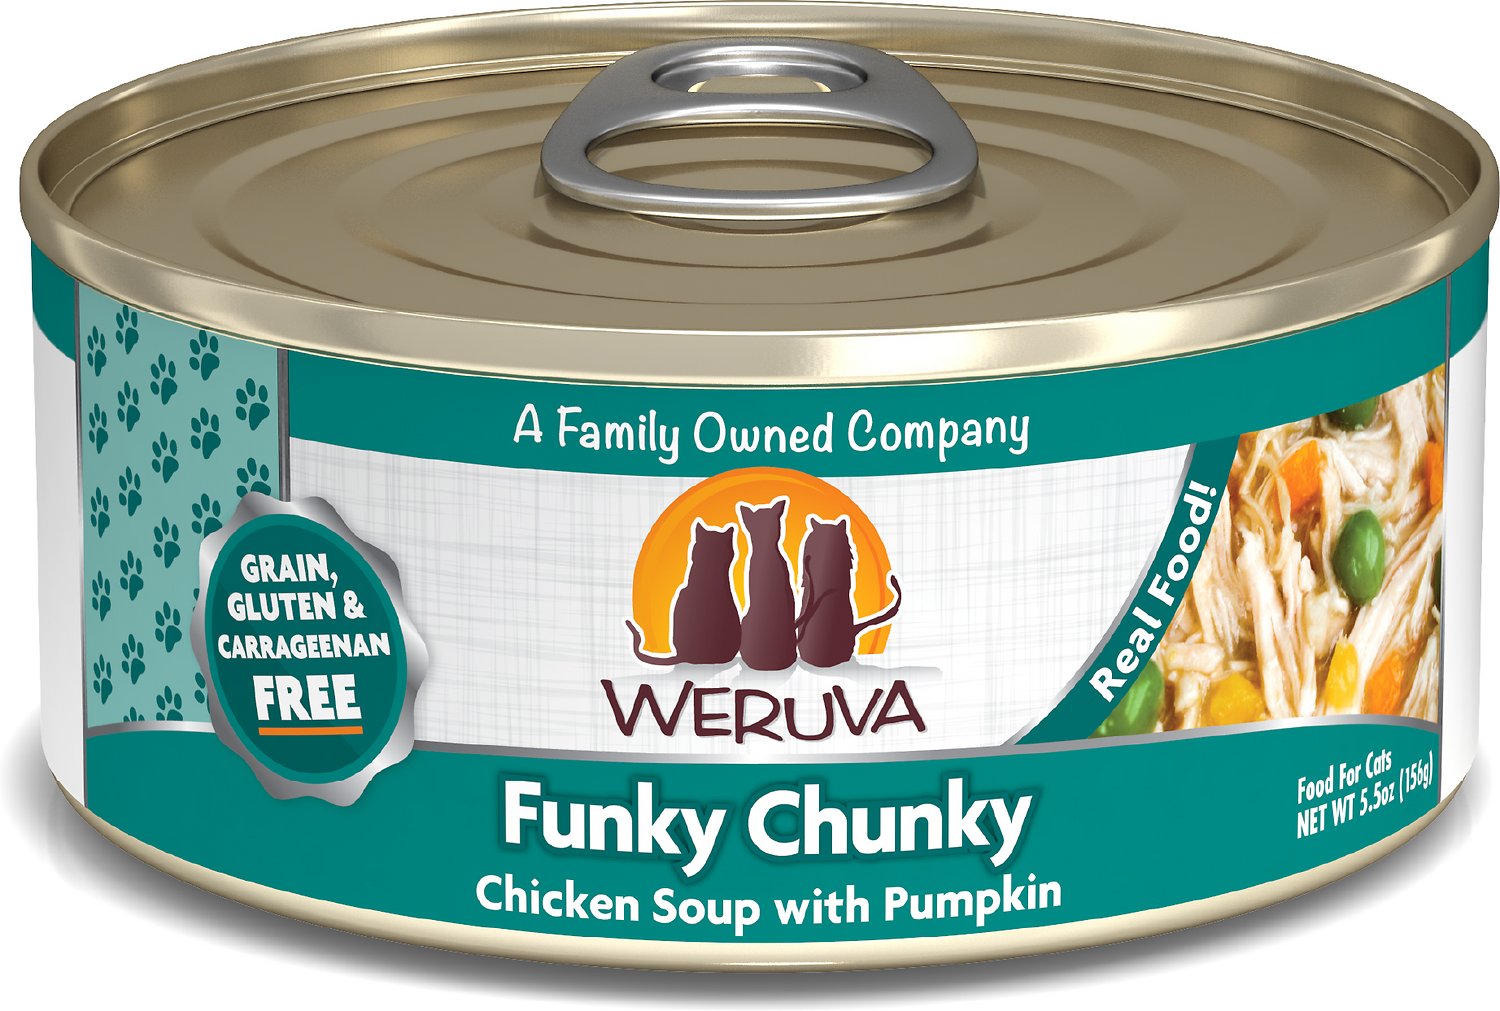 Weruva Funky Chunky Chicken Soup GF Canned Cat Food